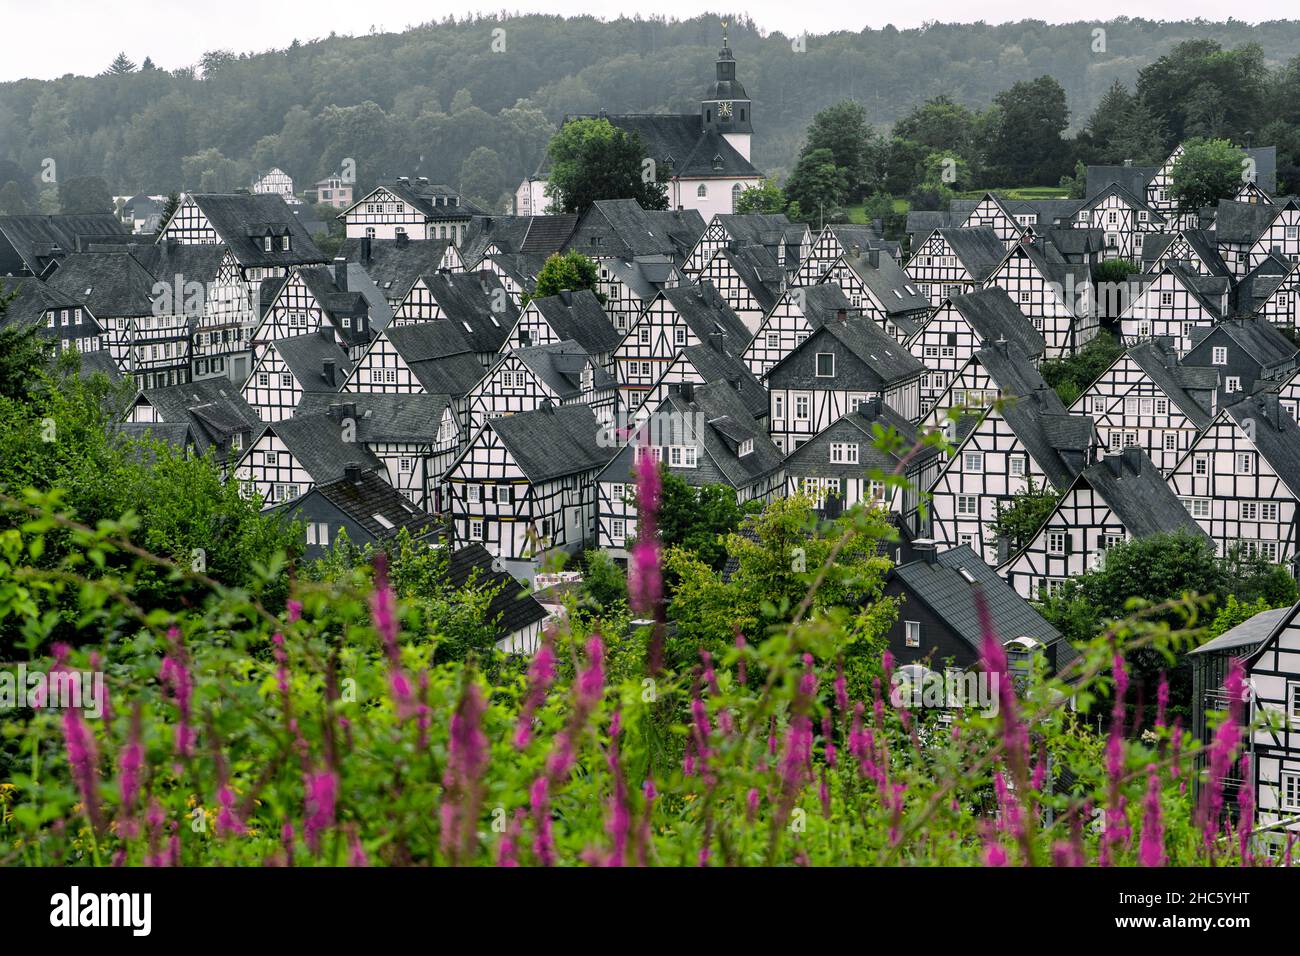 Beautiful shot of black and white houses in Freudenberg, Germany Stock Photo